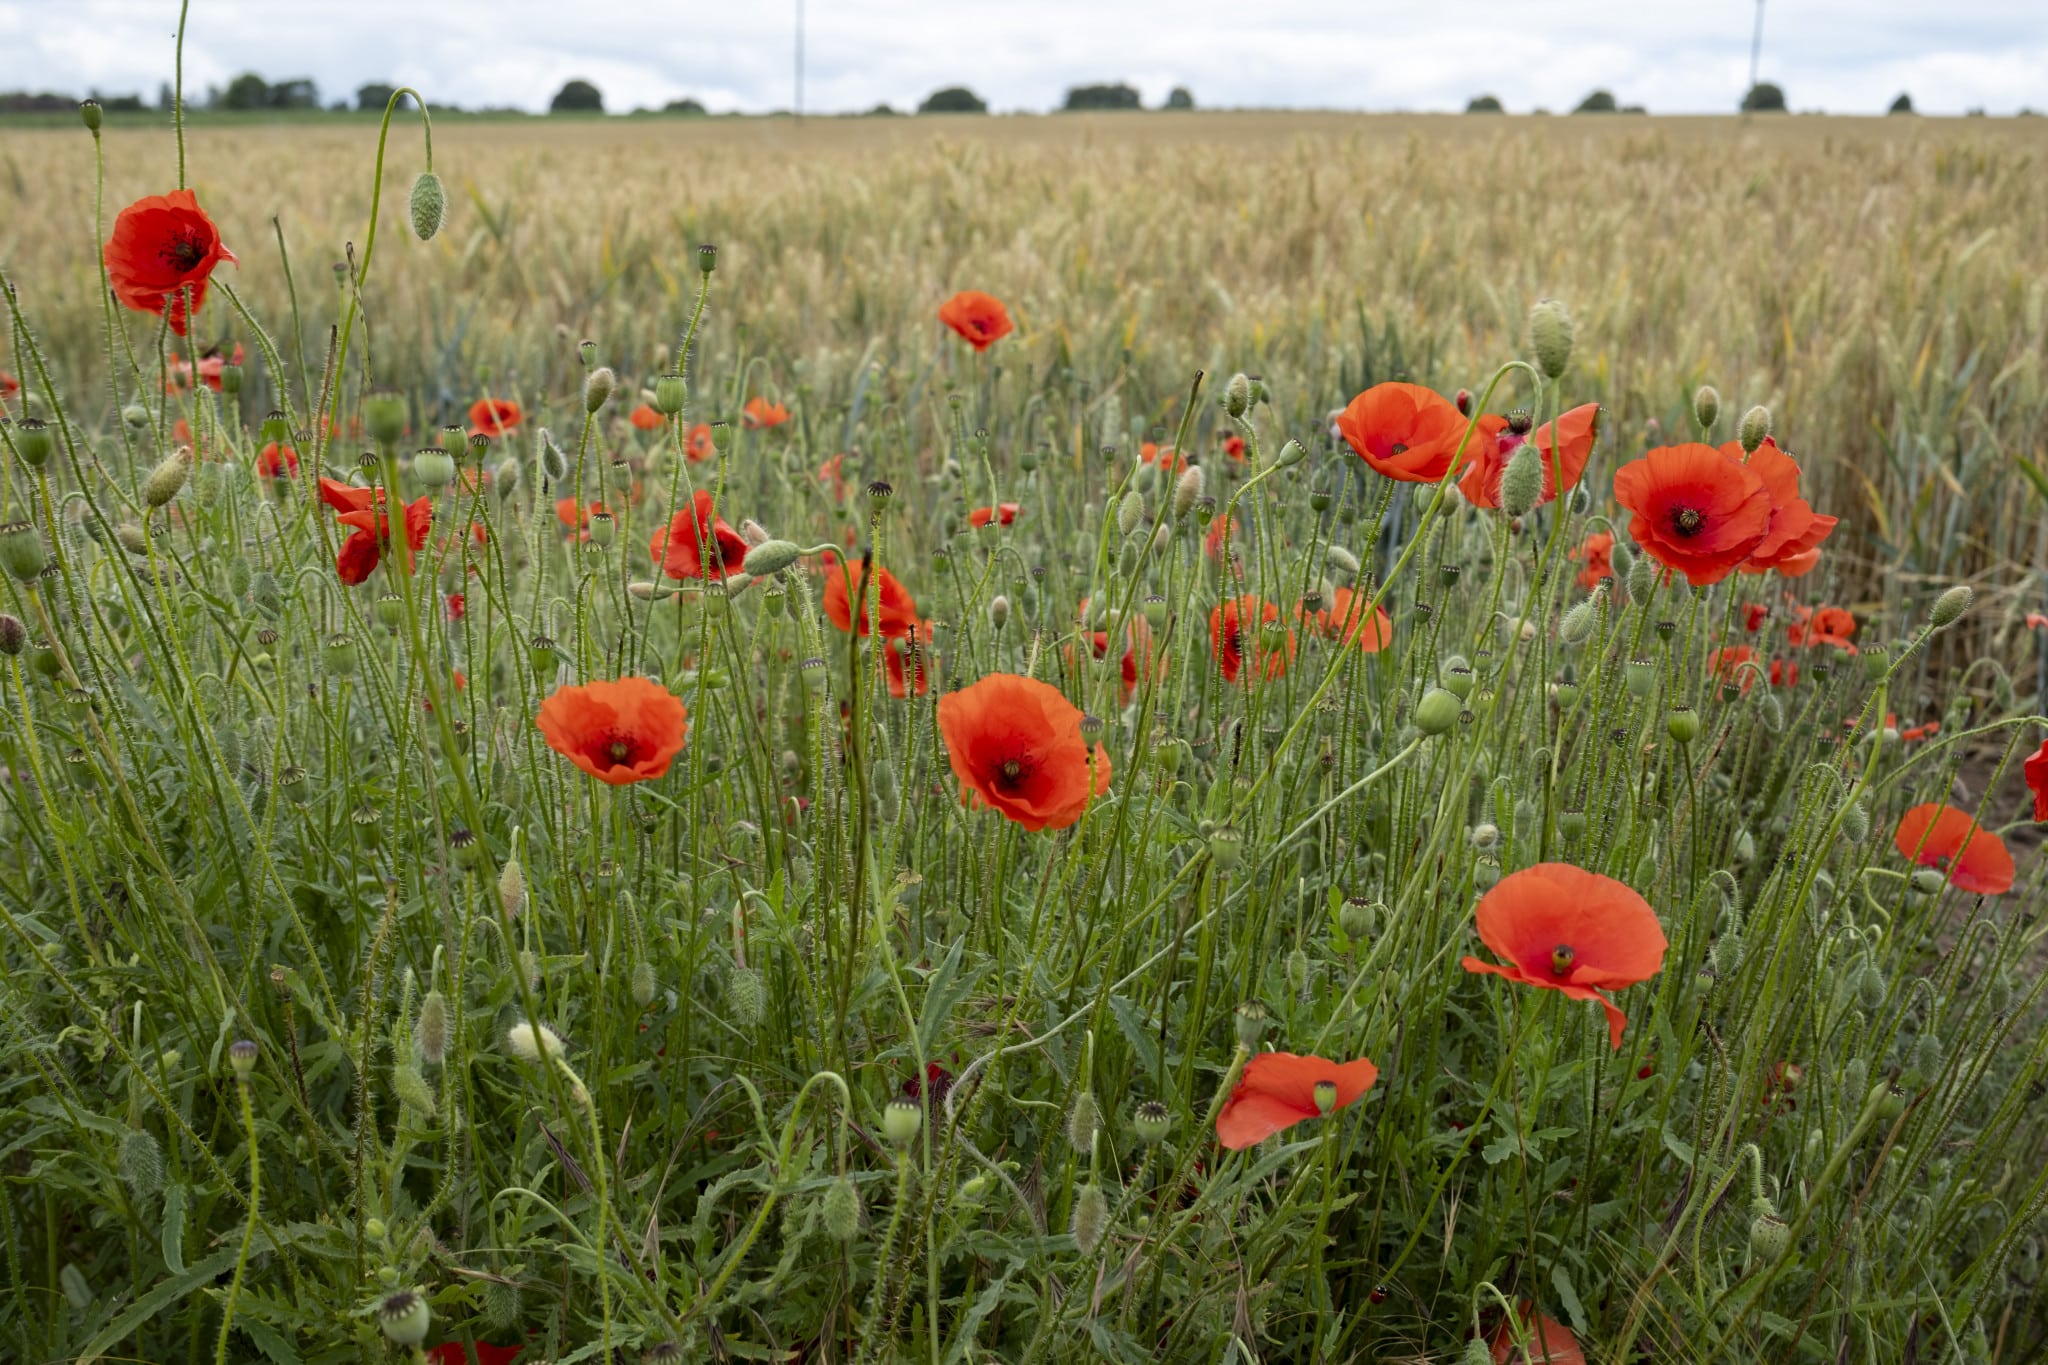 Rural farmland with field edging of wild flowers including red poppies on 7th August 2023 near Wolverly, United Kingdom. (photo by Mike Kemp/In Pictures via Getty Images)